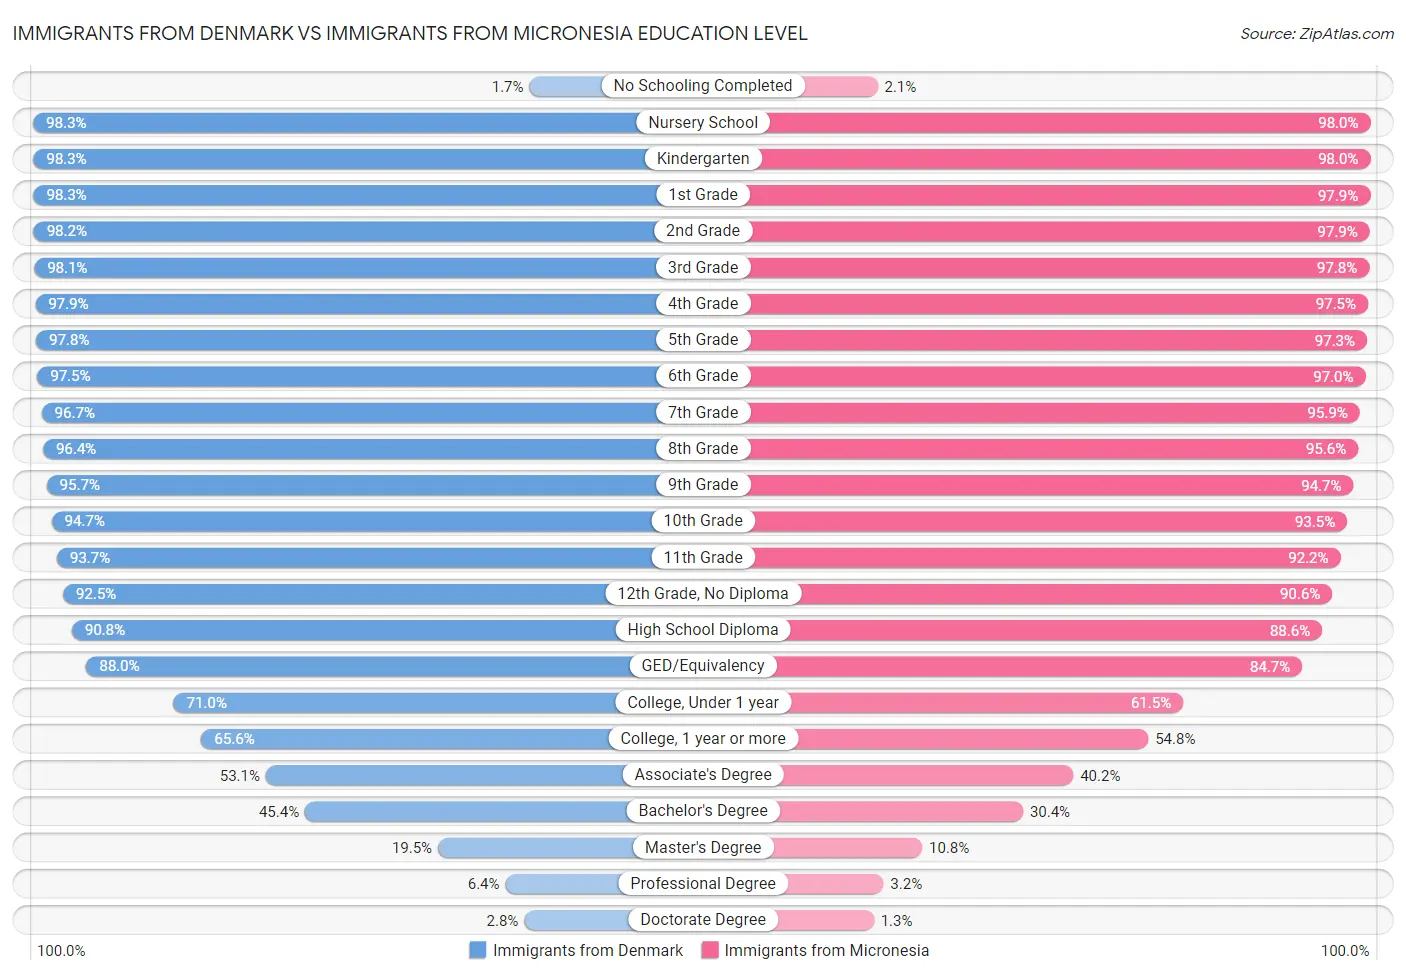 Immigrants from Denmark vs Immigrants from Micronesia Education Level